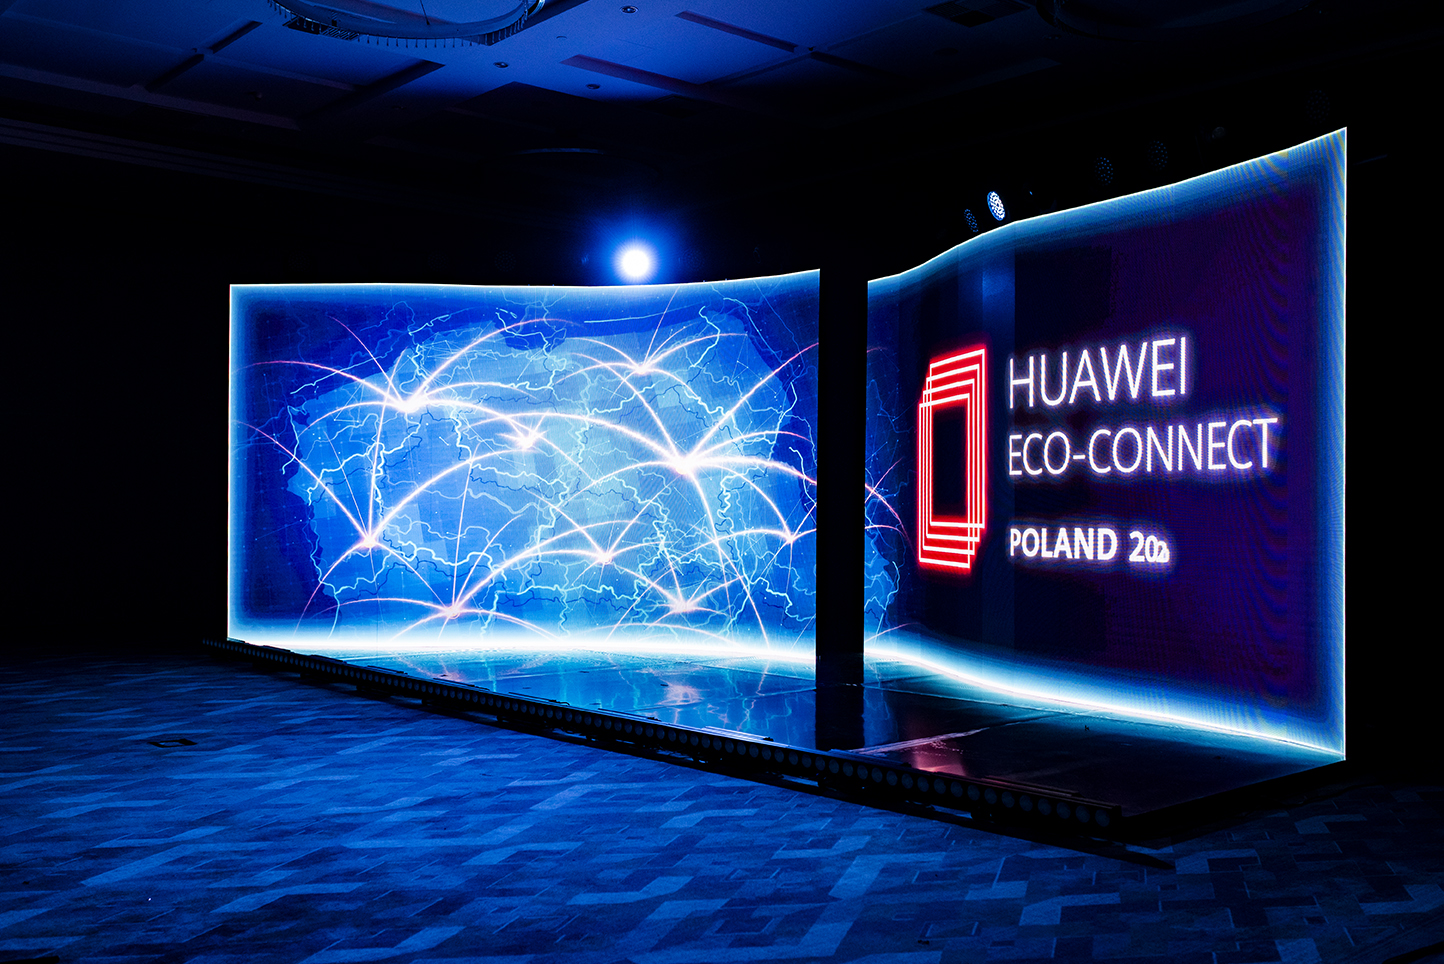 andrageren ortodoks Oversigt Huawei Eco-Connect Poland 2020 | Crossover 2023